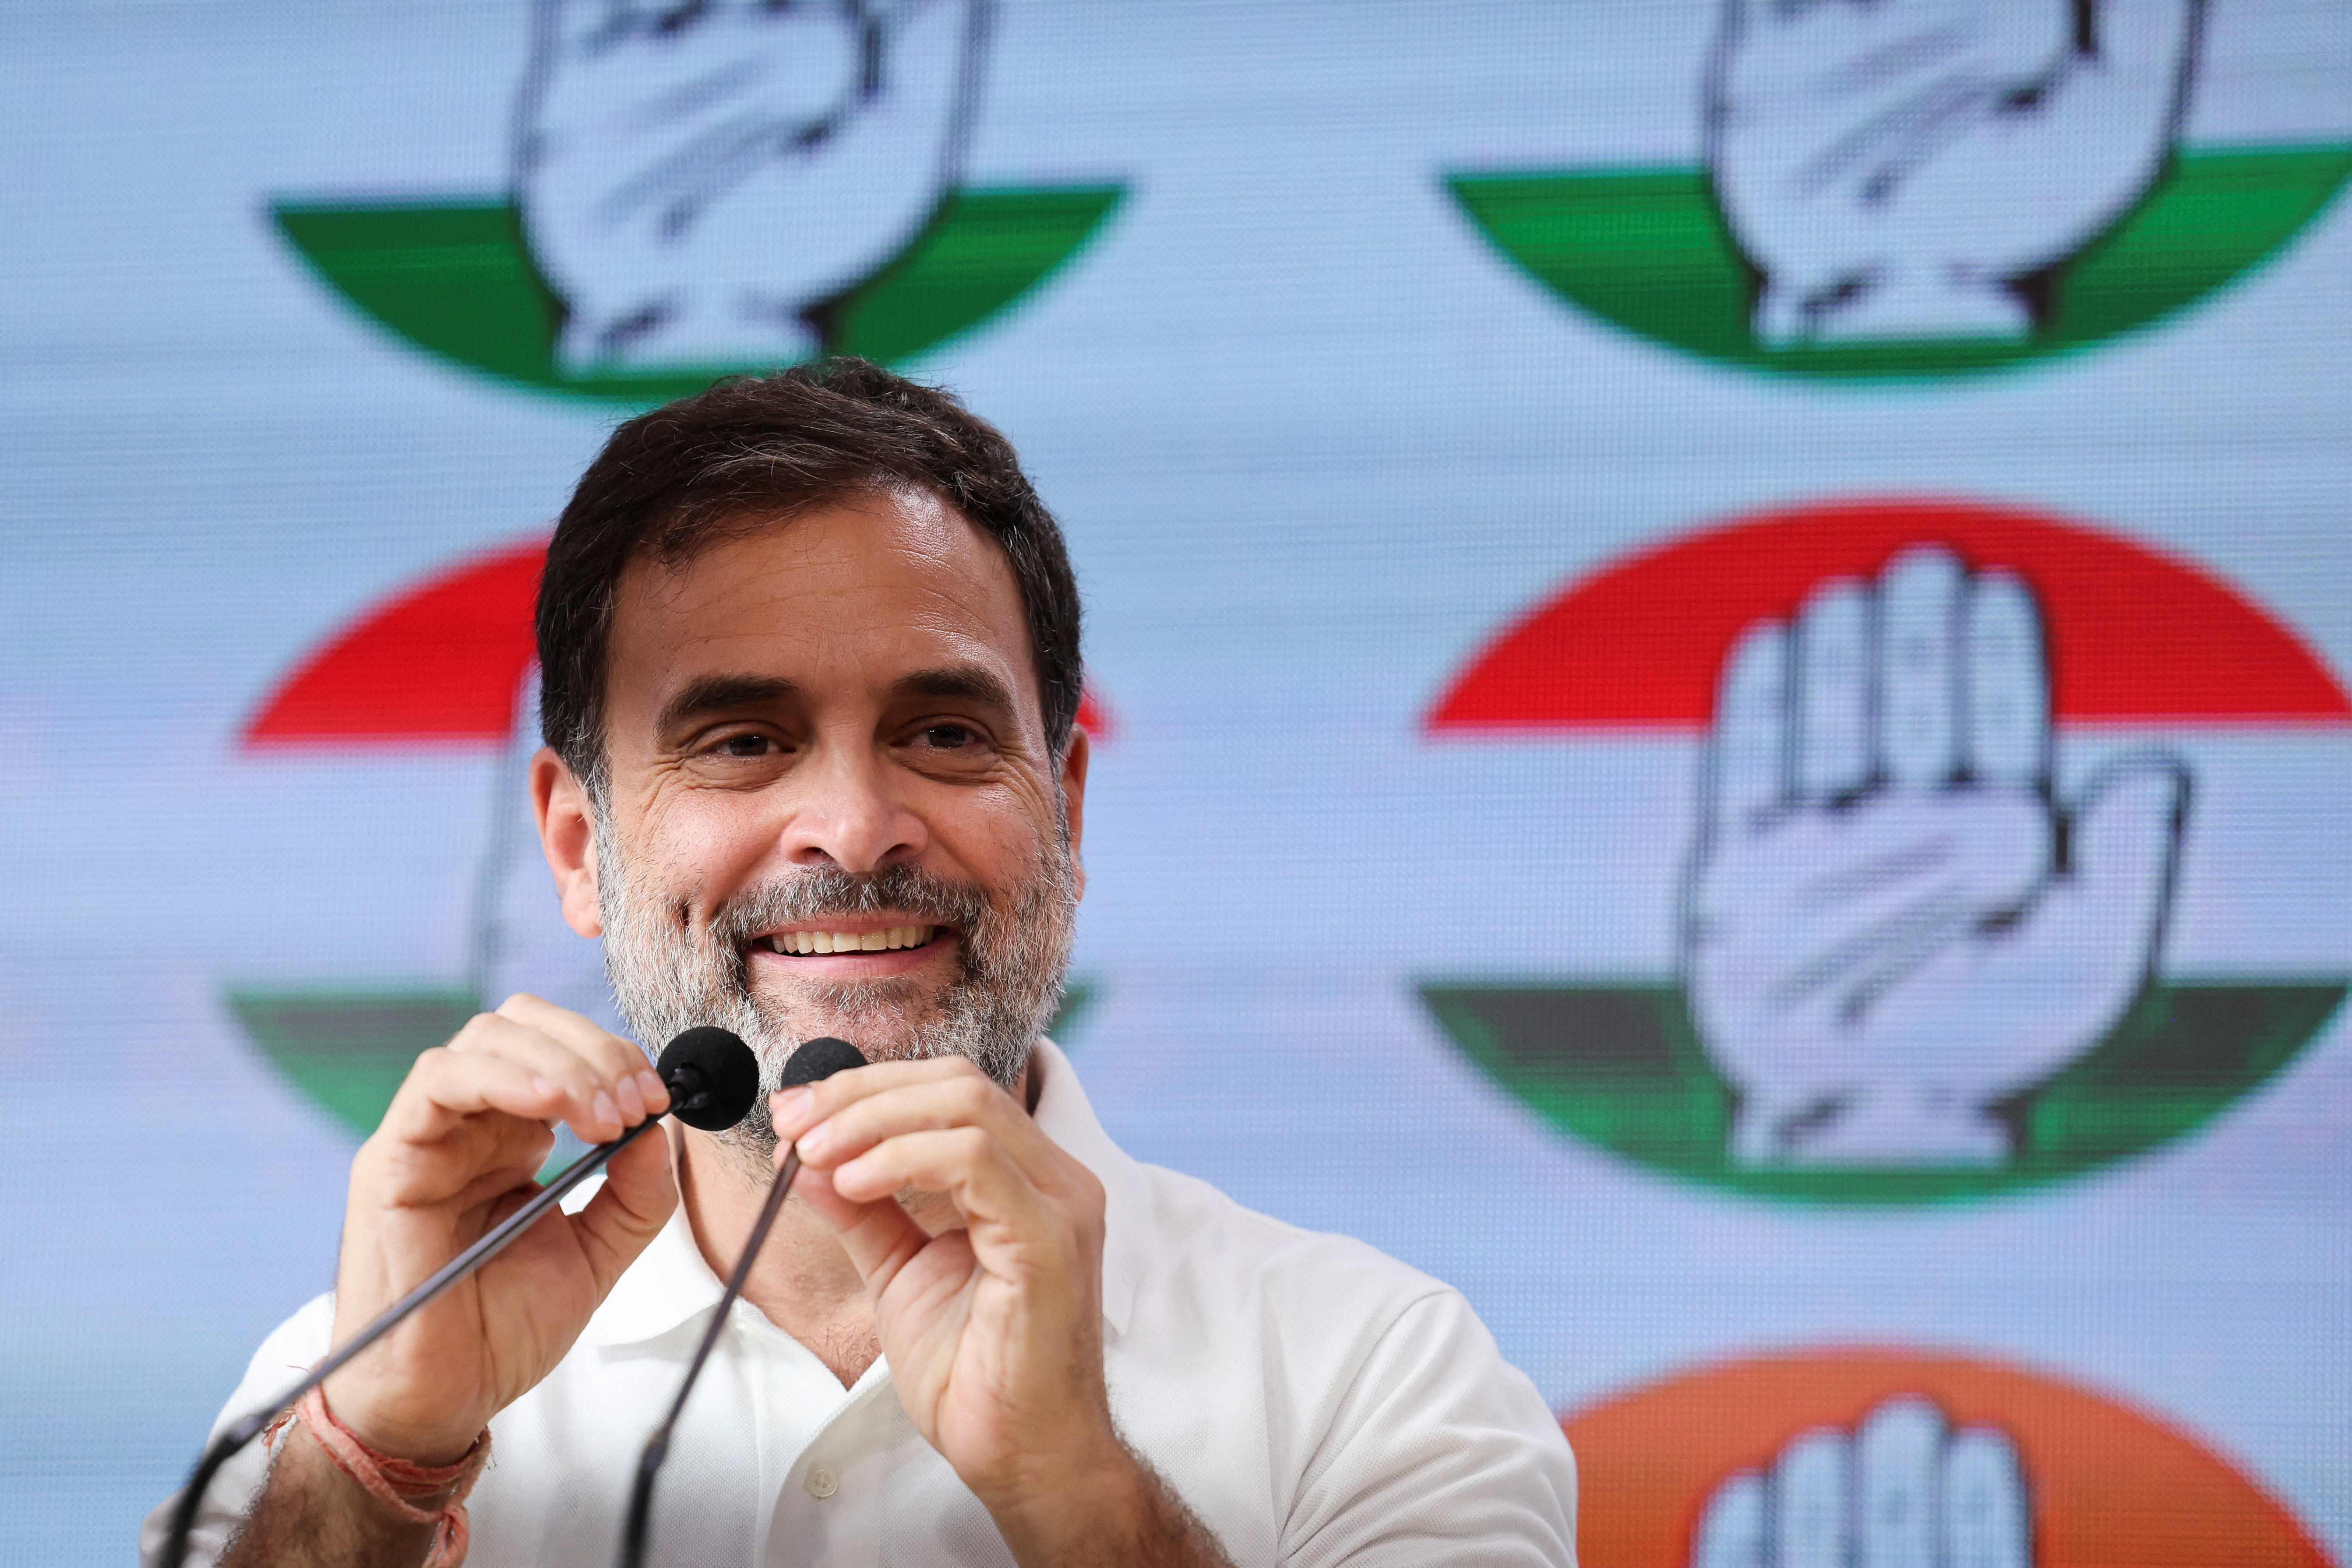 Rahul Gandhi, a senior leader of India's main opposition Congress party, holds a press conference, in New Delhi